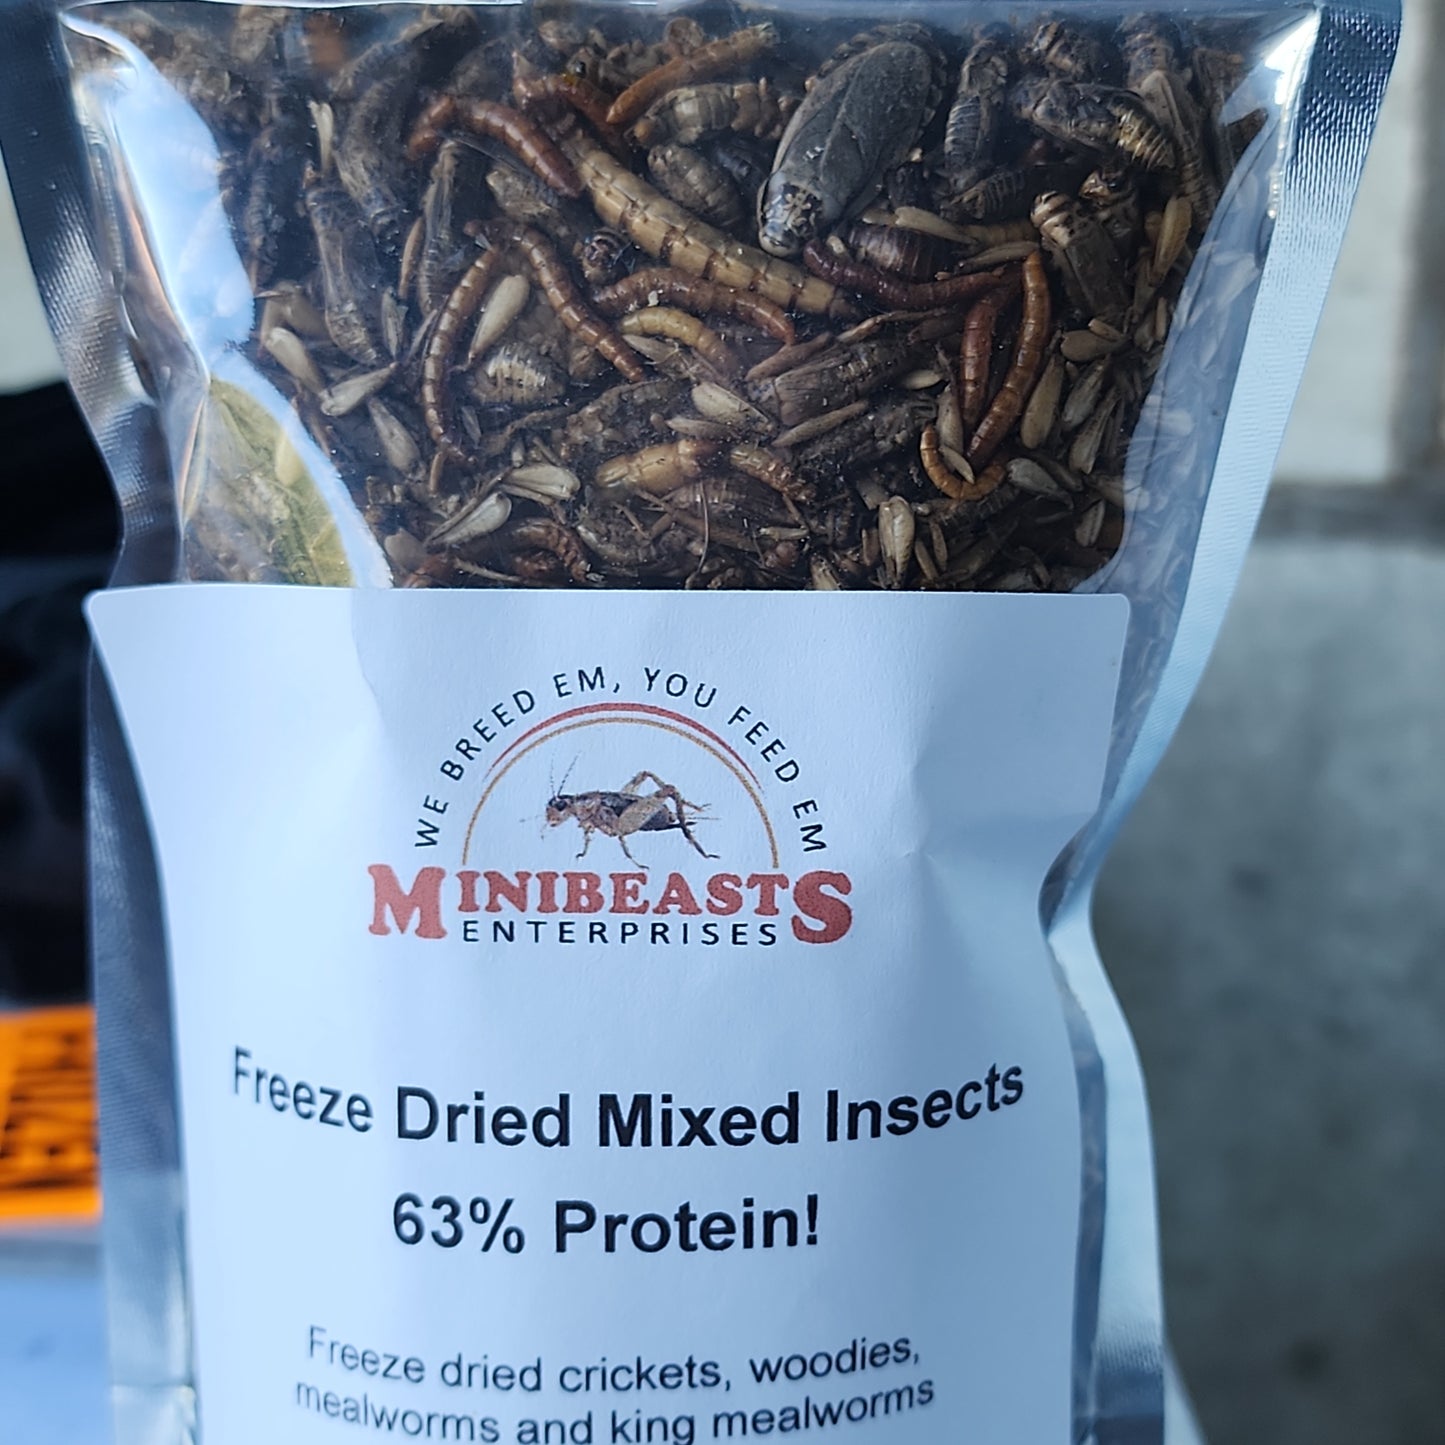 Minibeasts Freeze Dried Mixed Insects